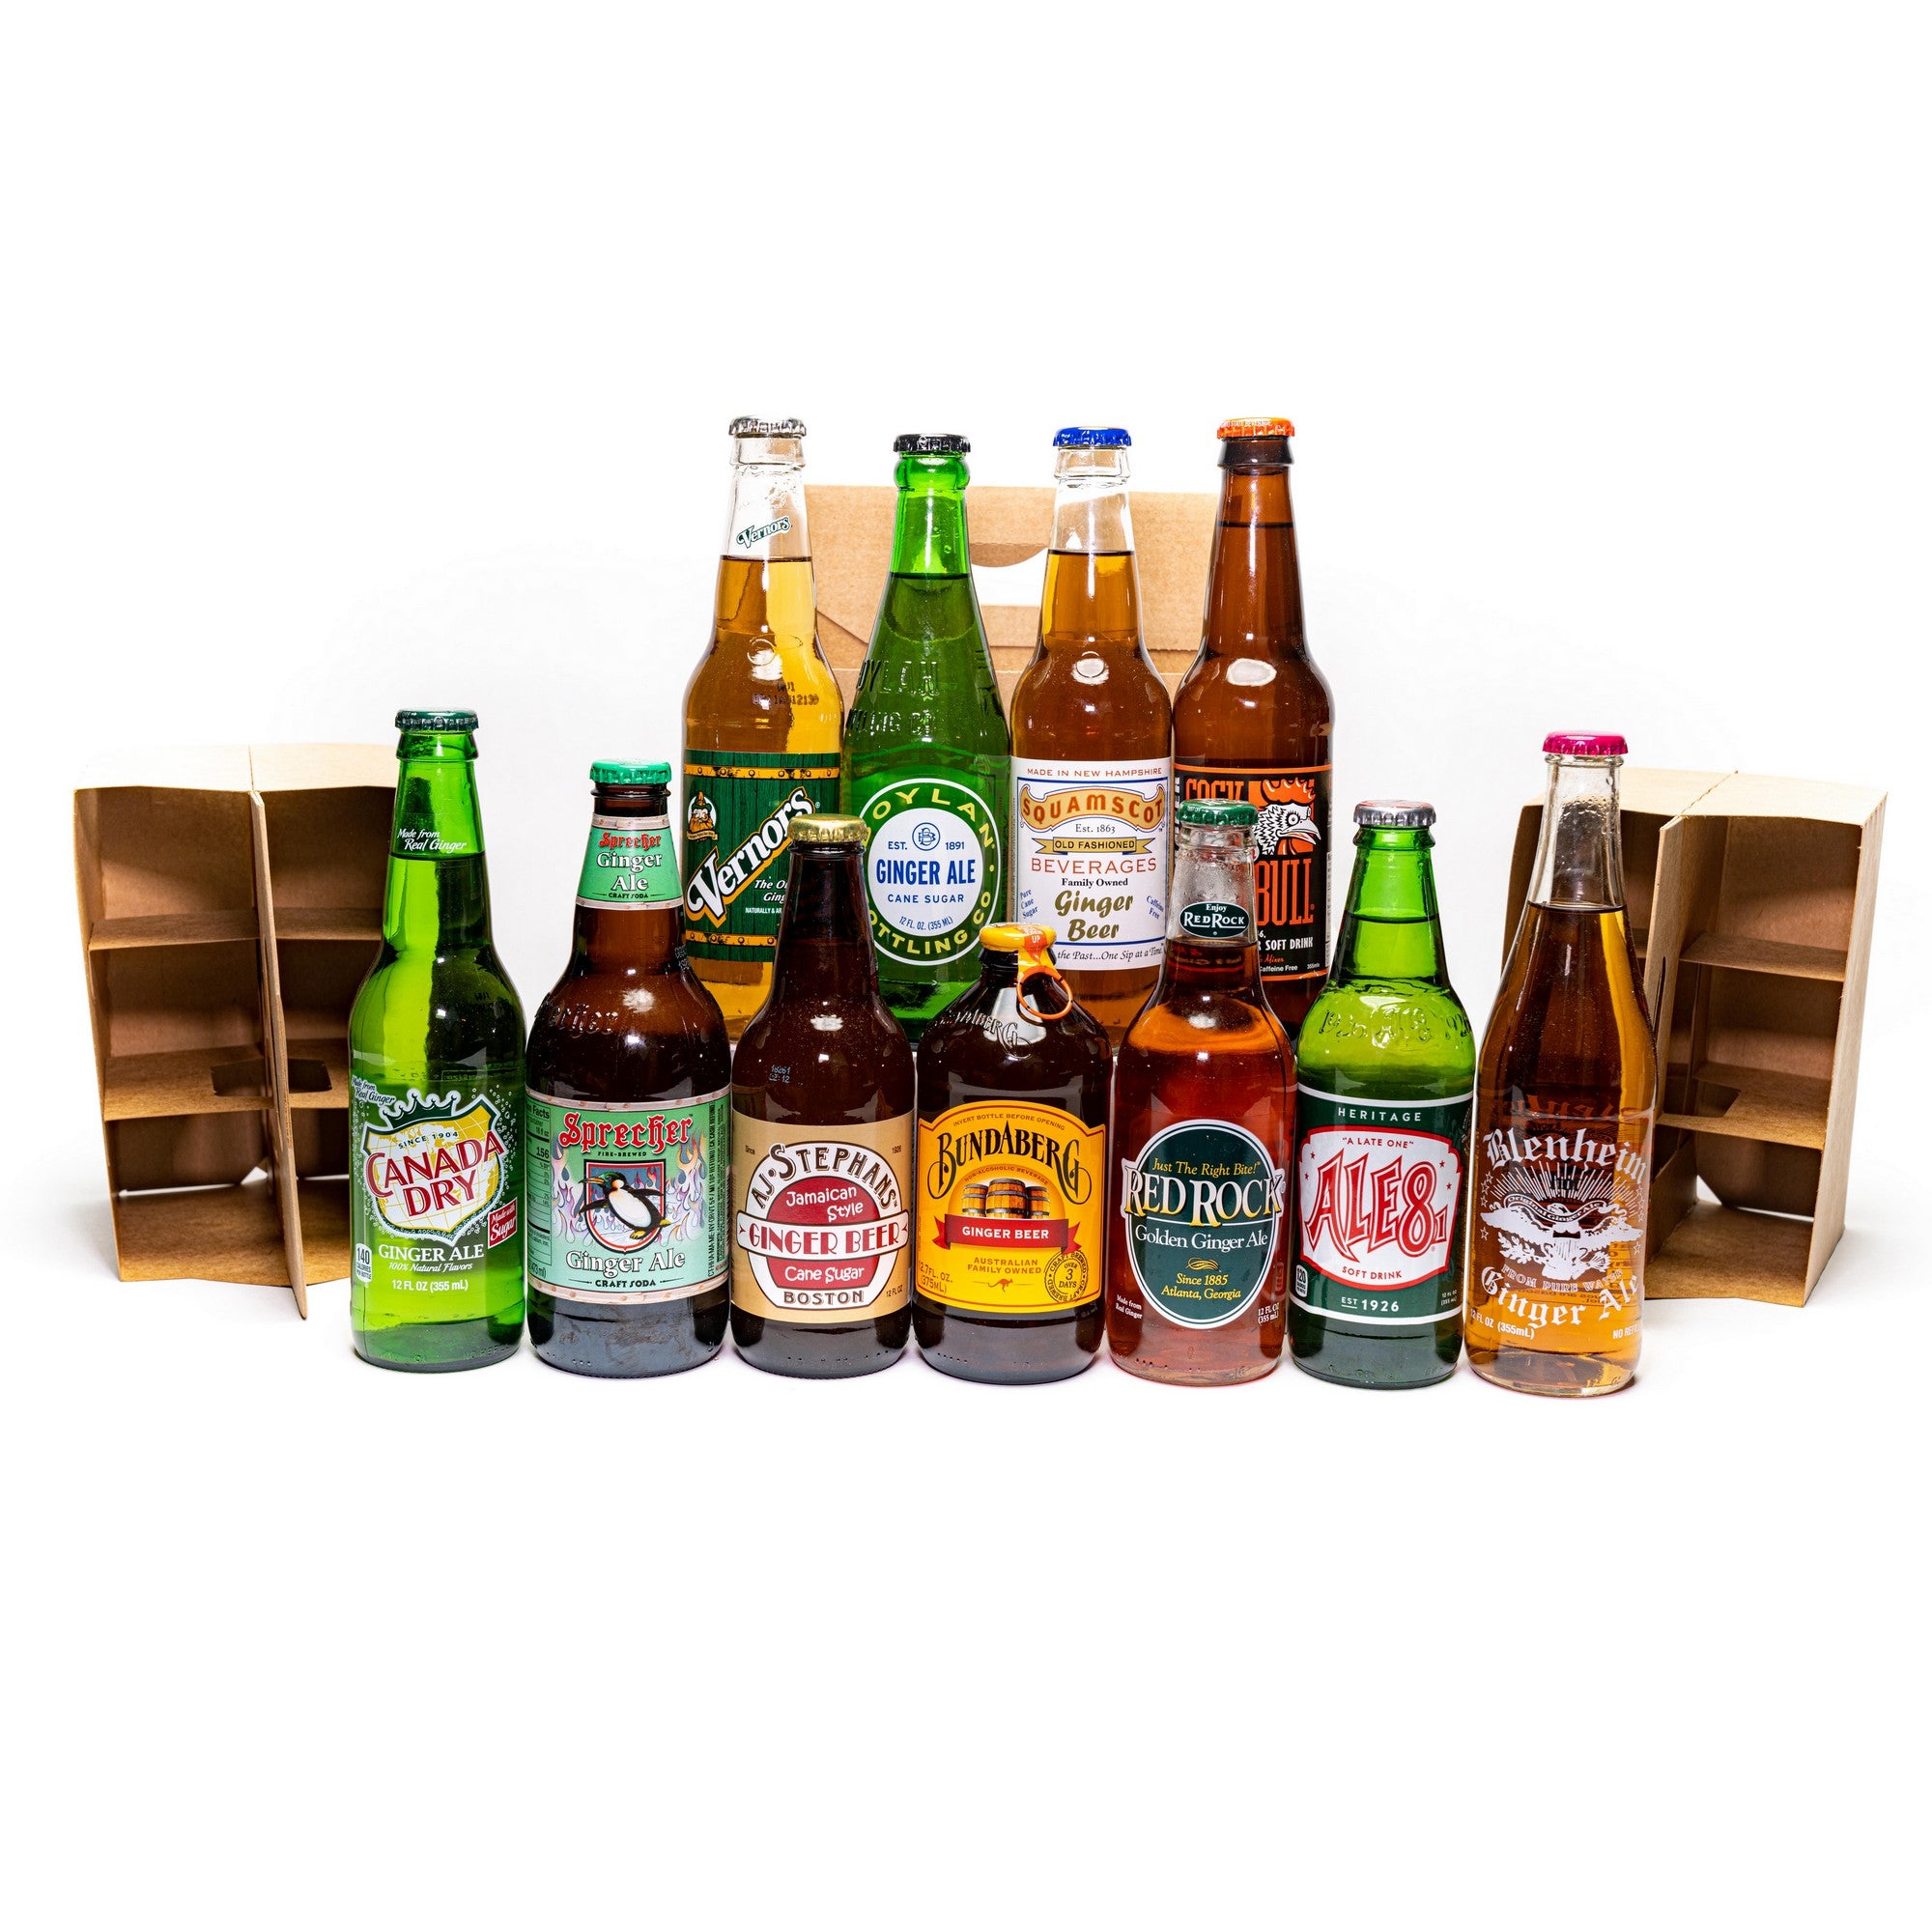 Ginger Ale / Ginger Beer Sampler 6 Pack - Novelty Candy, Retro Glass Soda &  Quirky Gifts – Blooms Candy & Soda Pop Shop